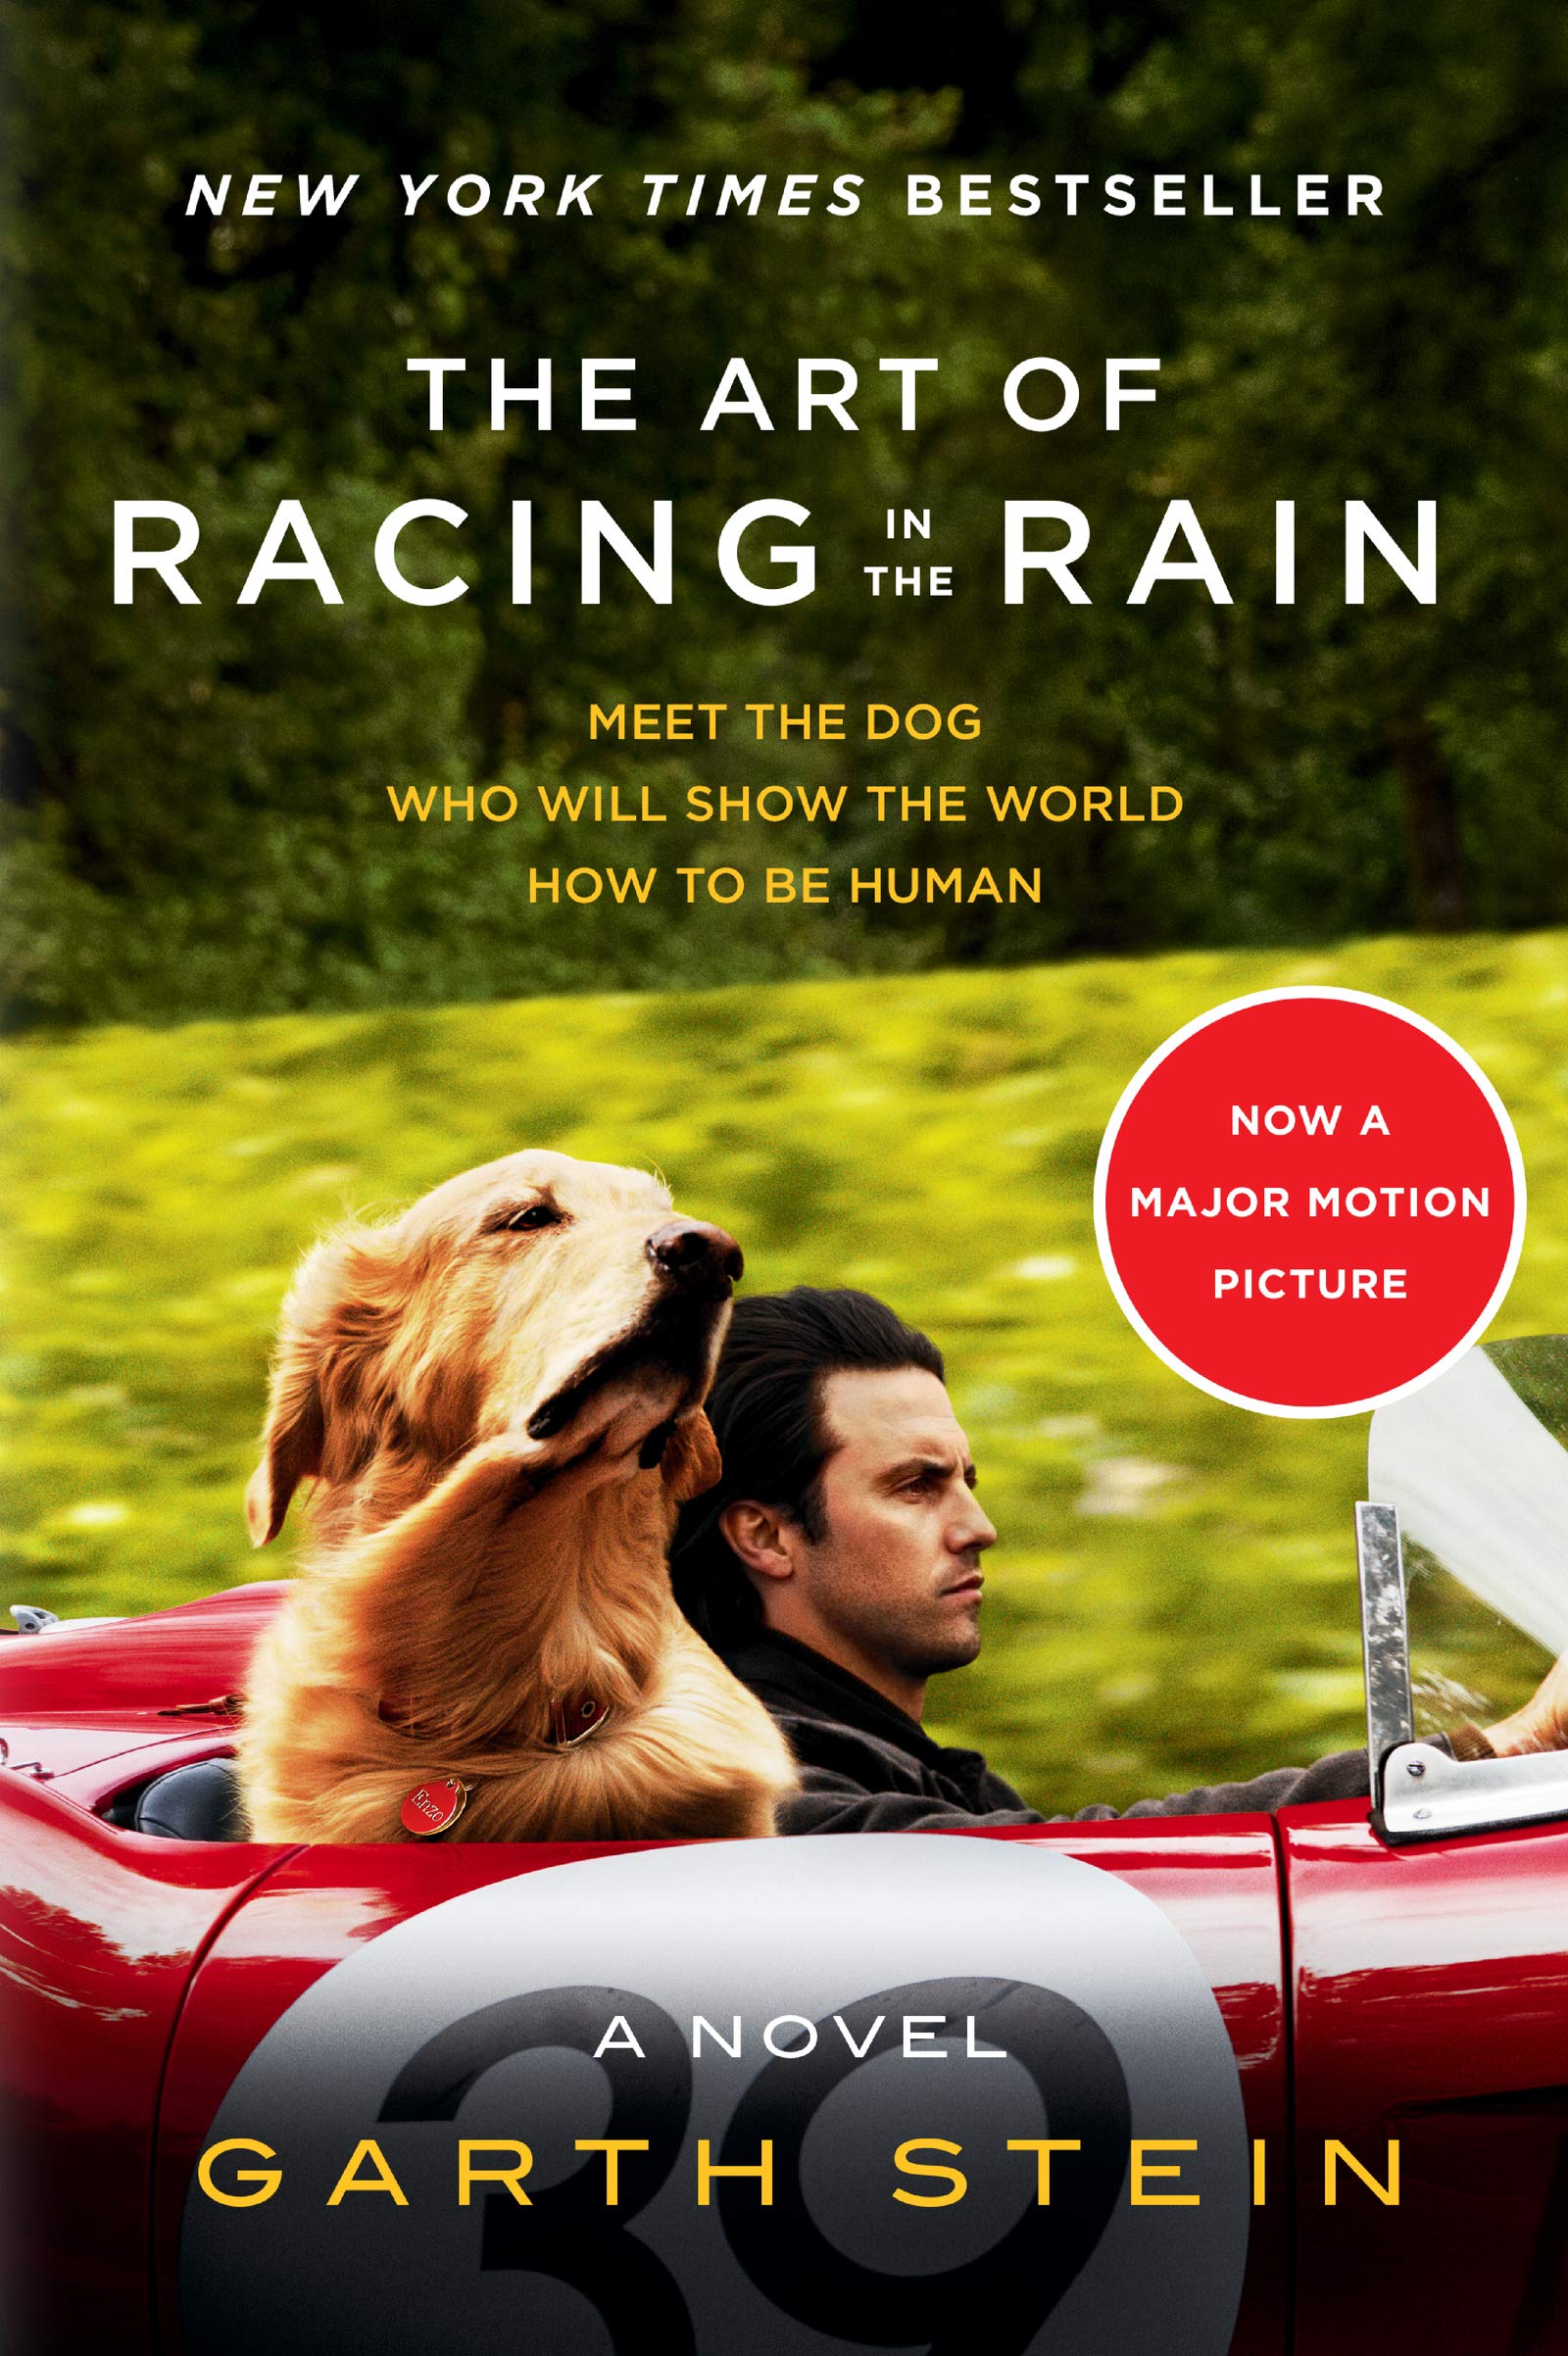 The Art of Racing in the Rain, a novel by Garth Stein